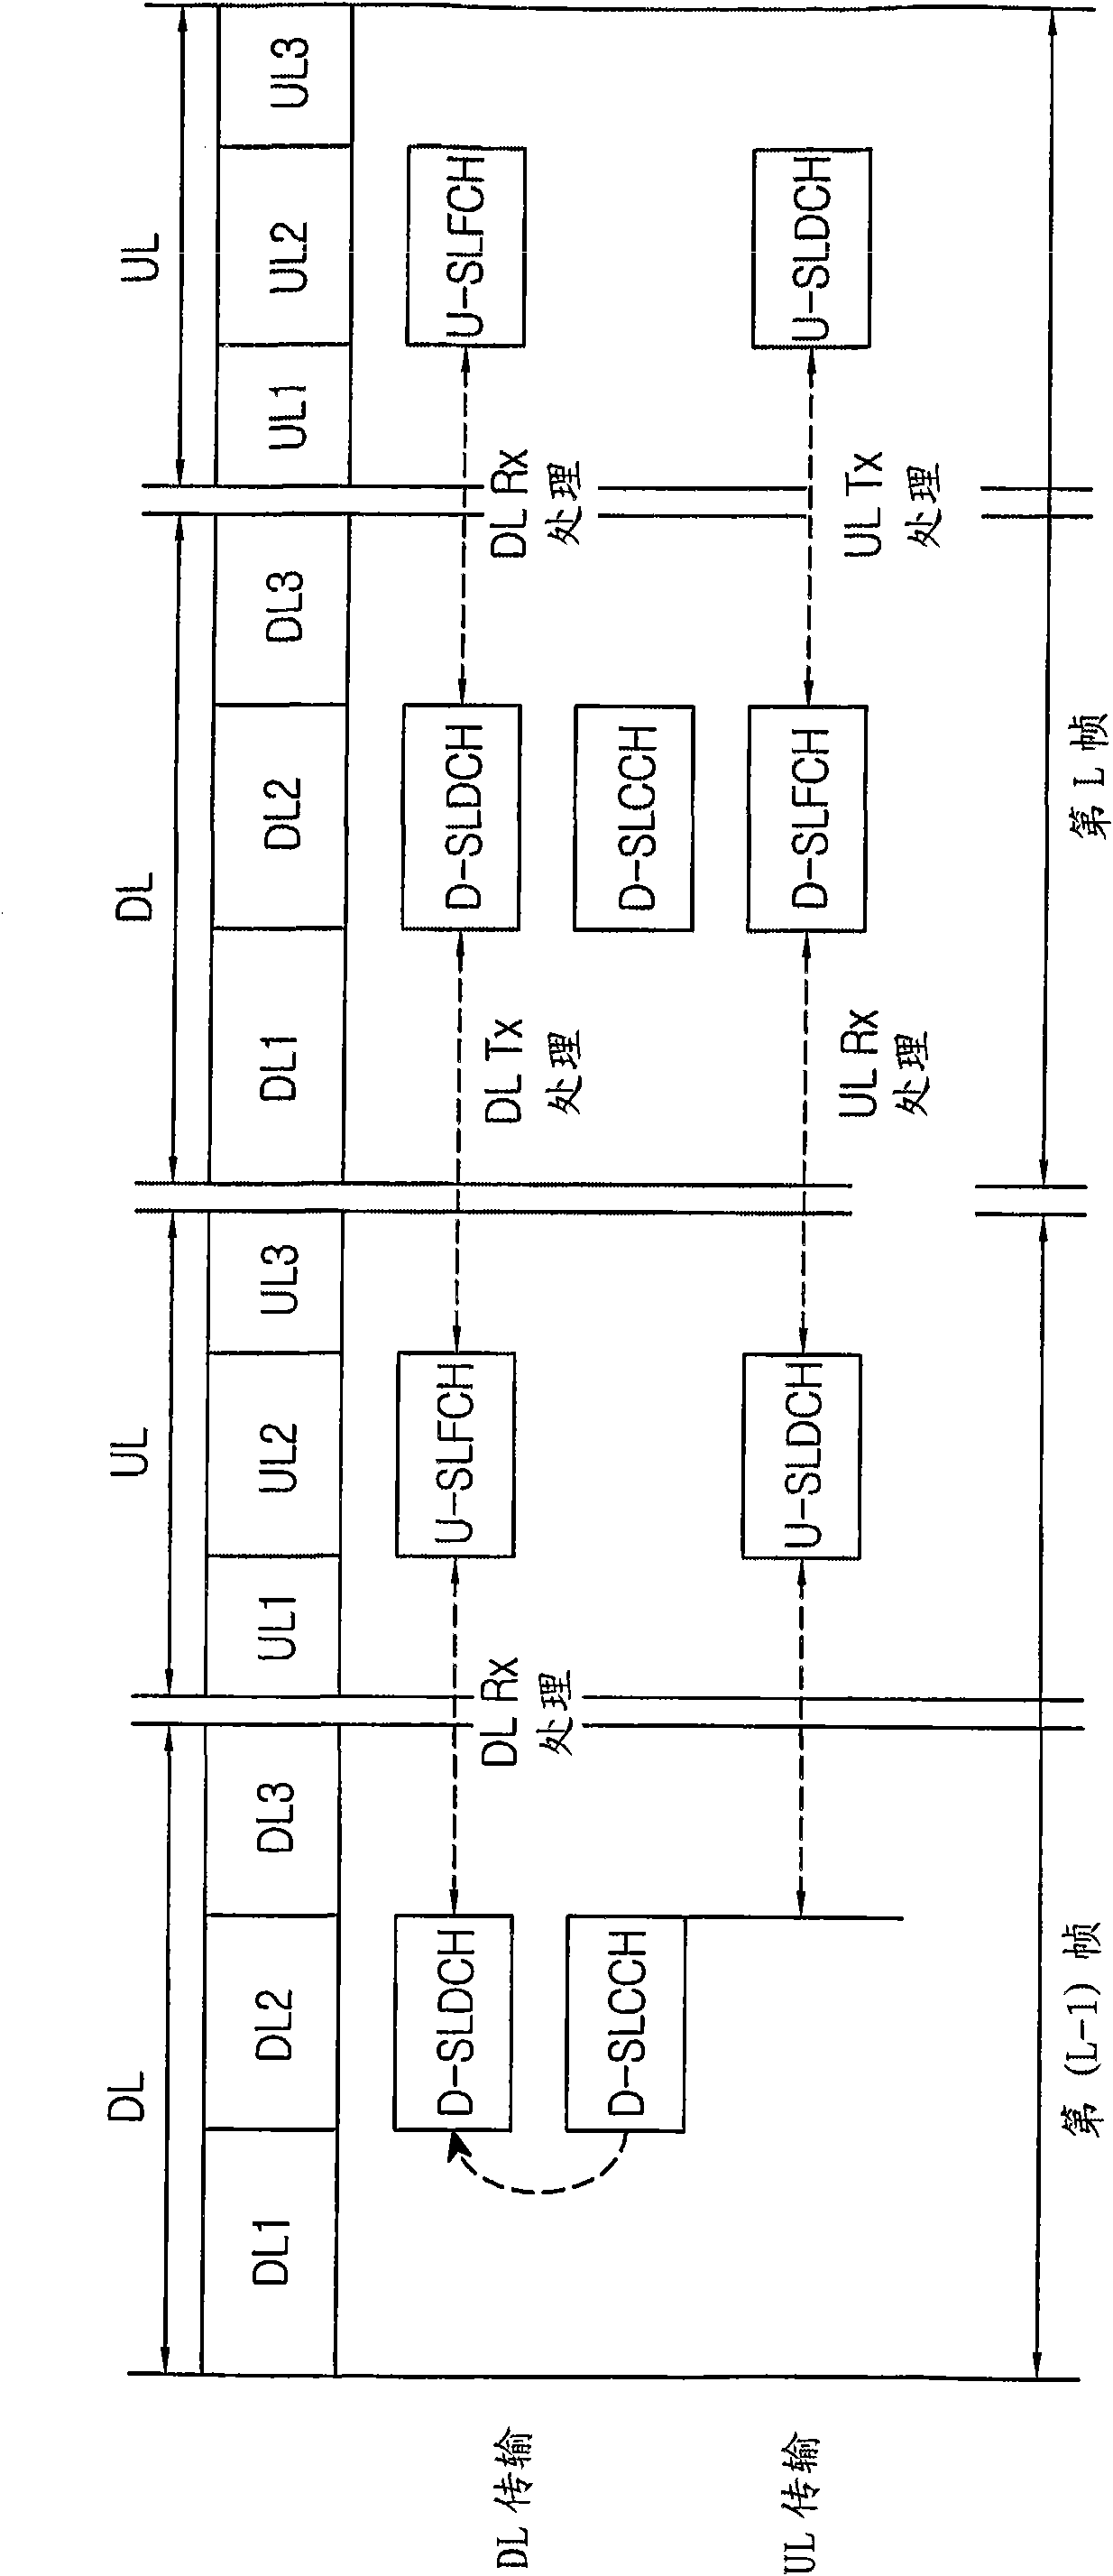 Method for supporting short latency data transmission in a mobile communication system